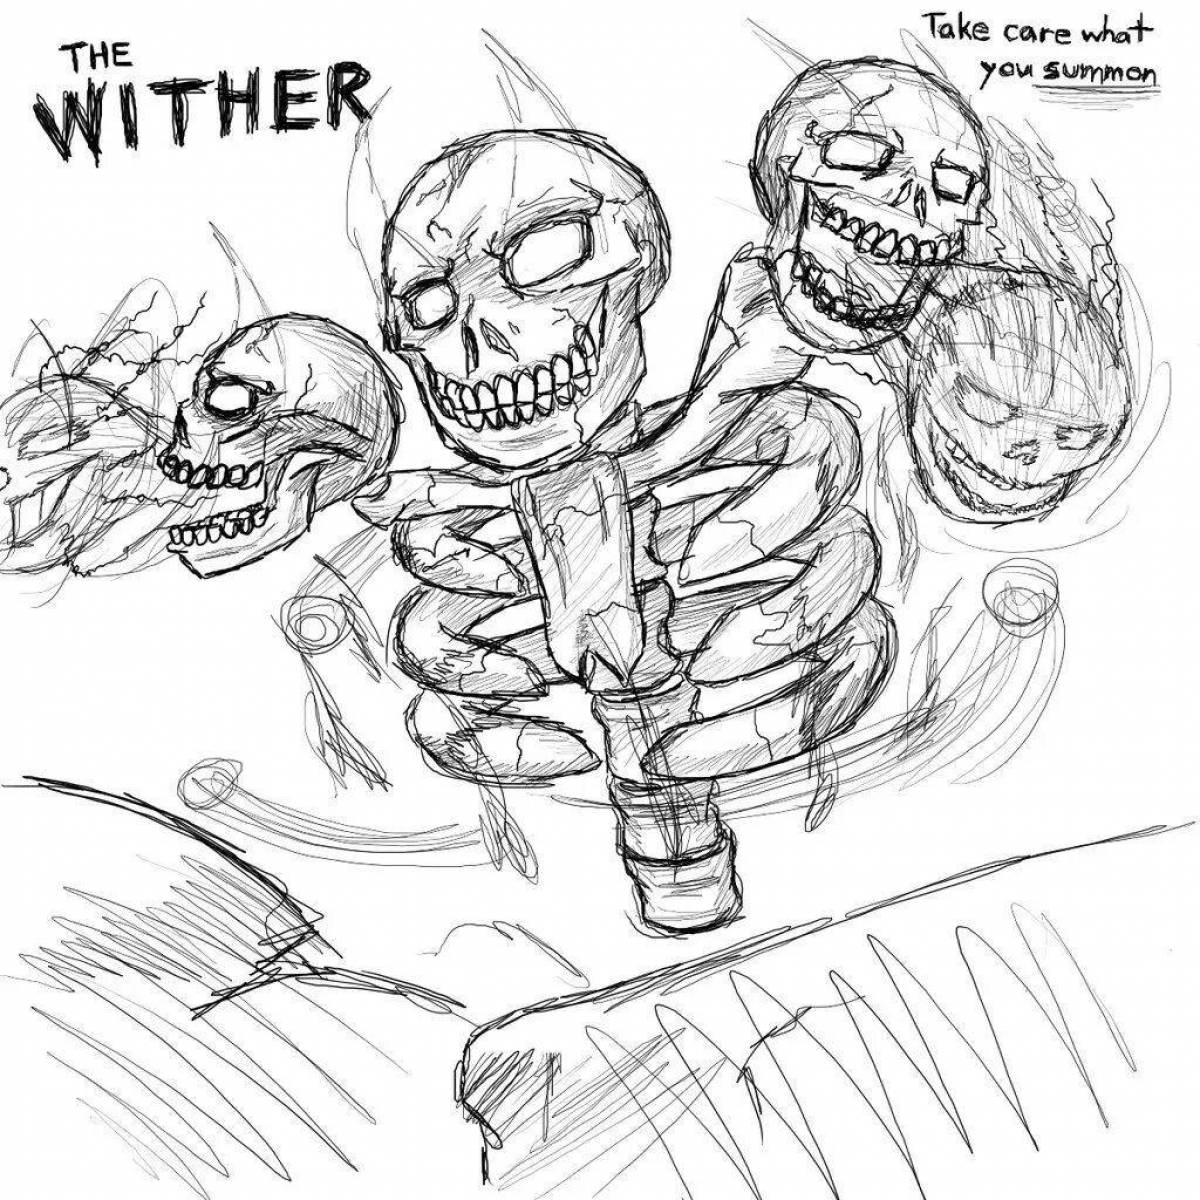 Splendid minecraft wither storm coloring page